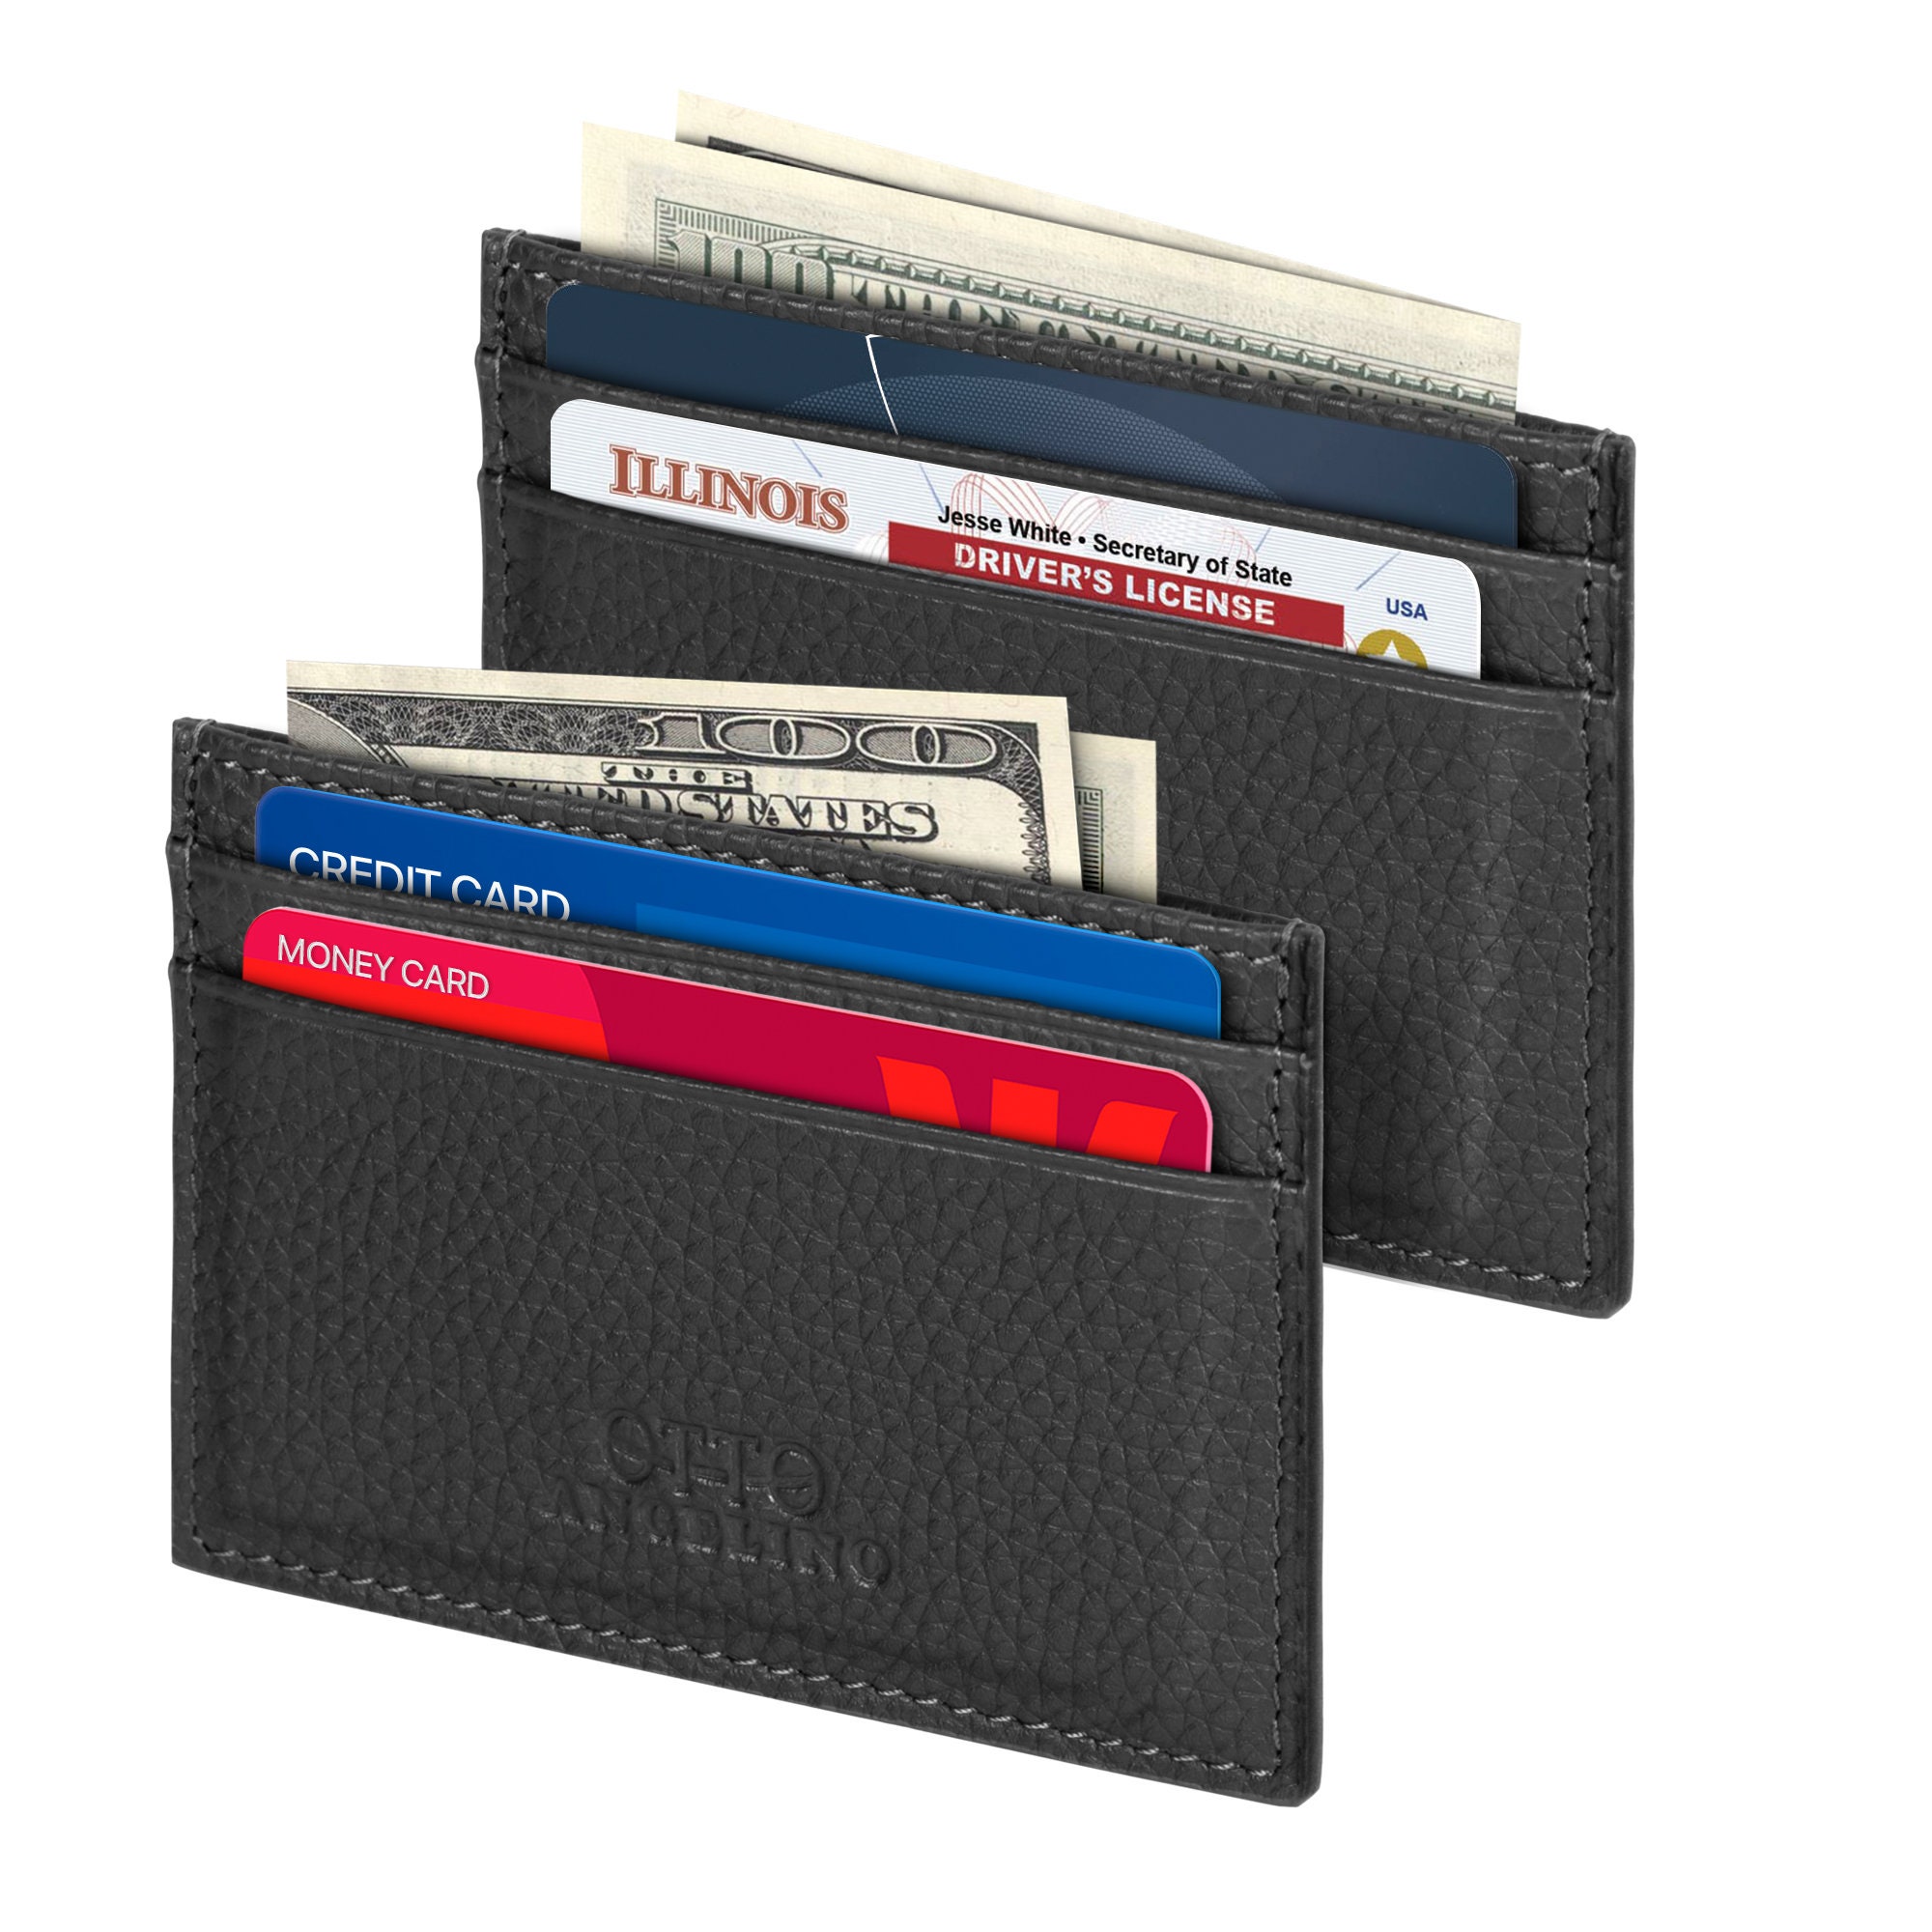 Executive Collection RFID Blocking Card Holder with Money Clip